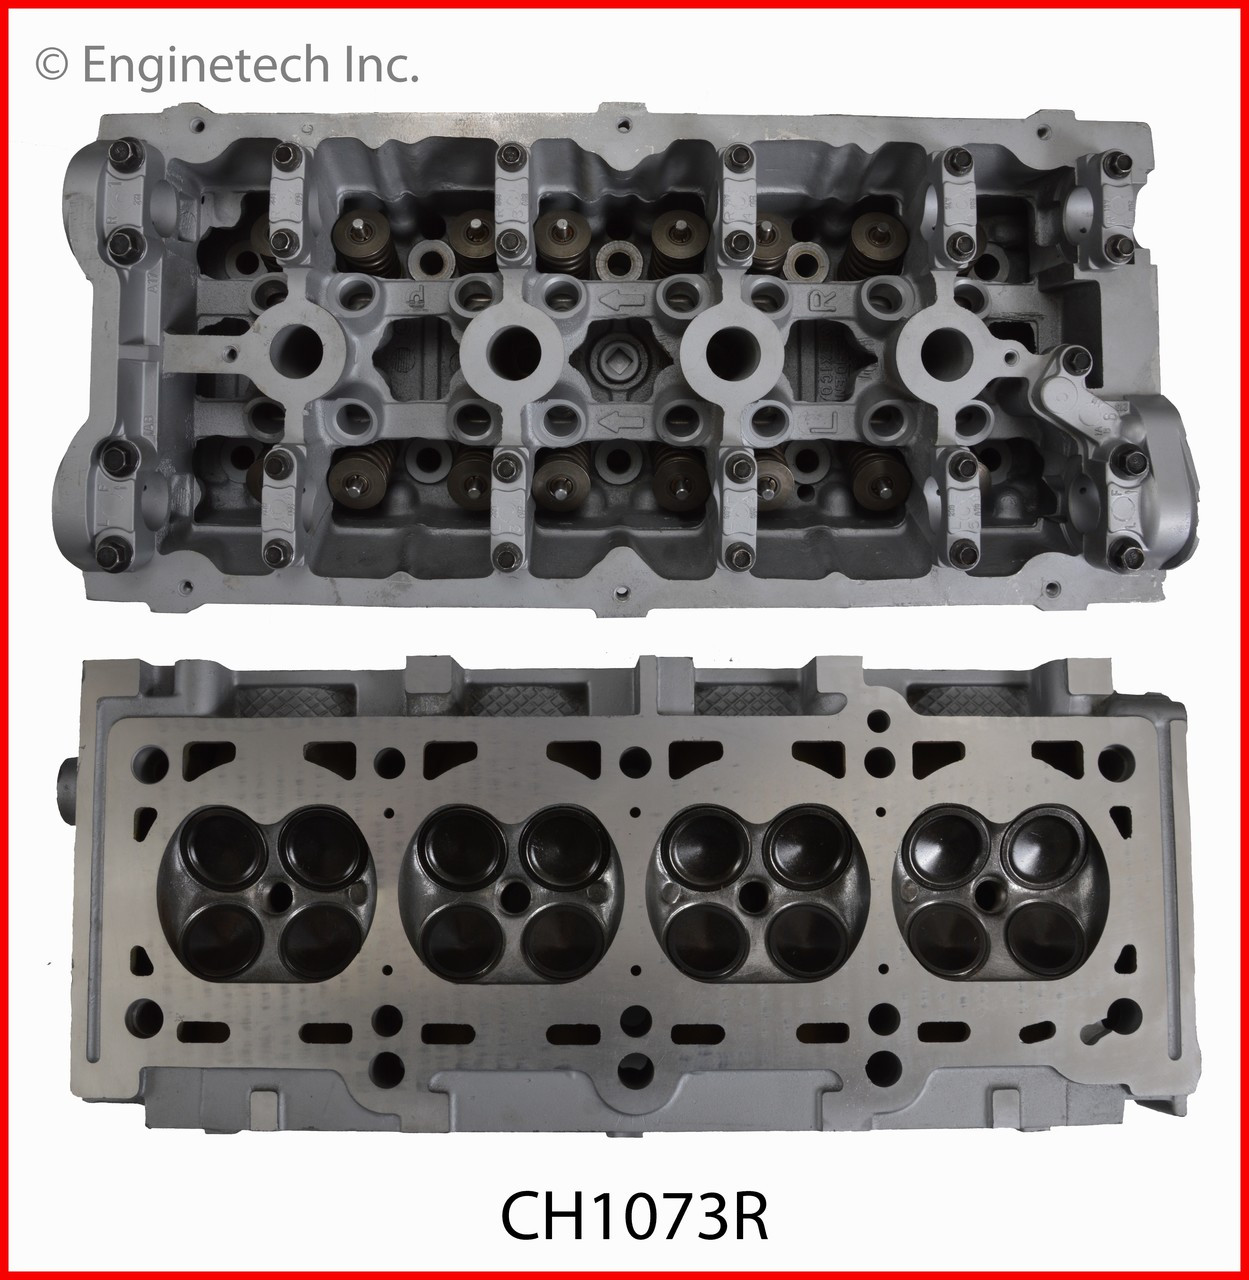 1997 Dodge Stratus 2.4L Engine Cylinder Head Assembly CH1073R -14